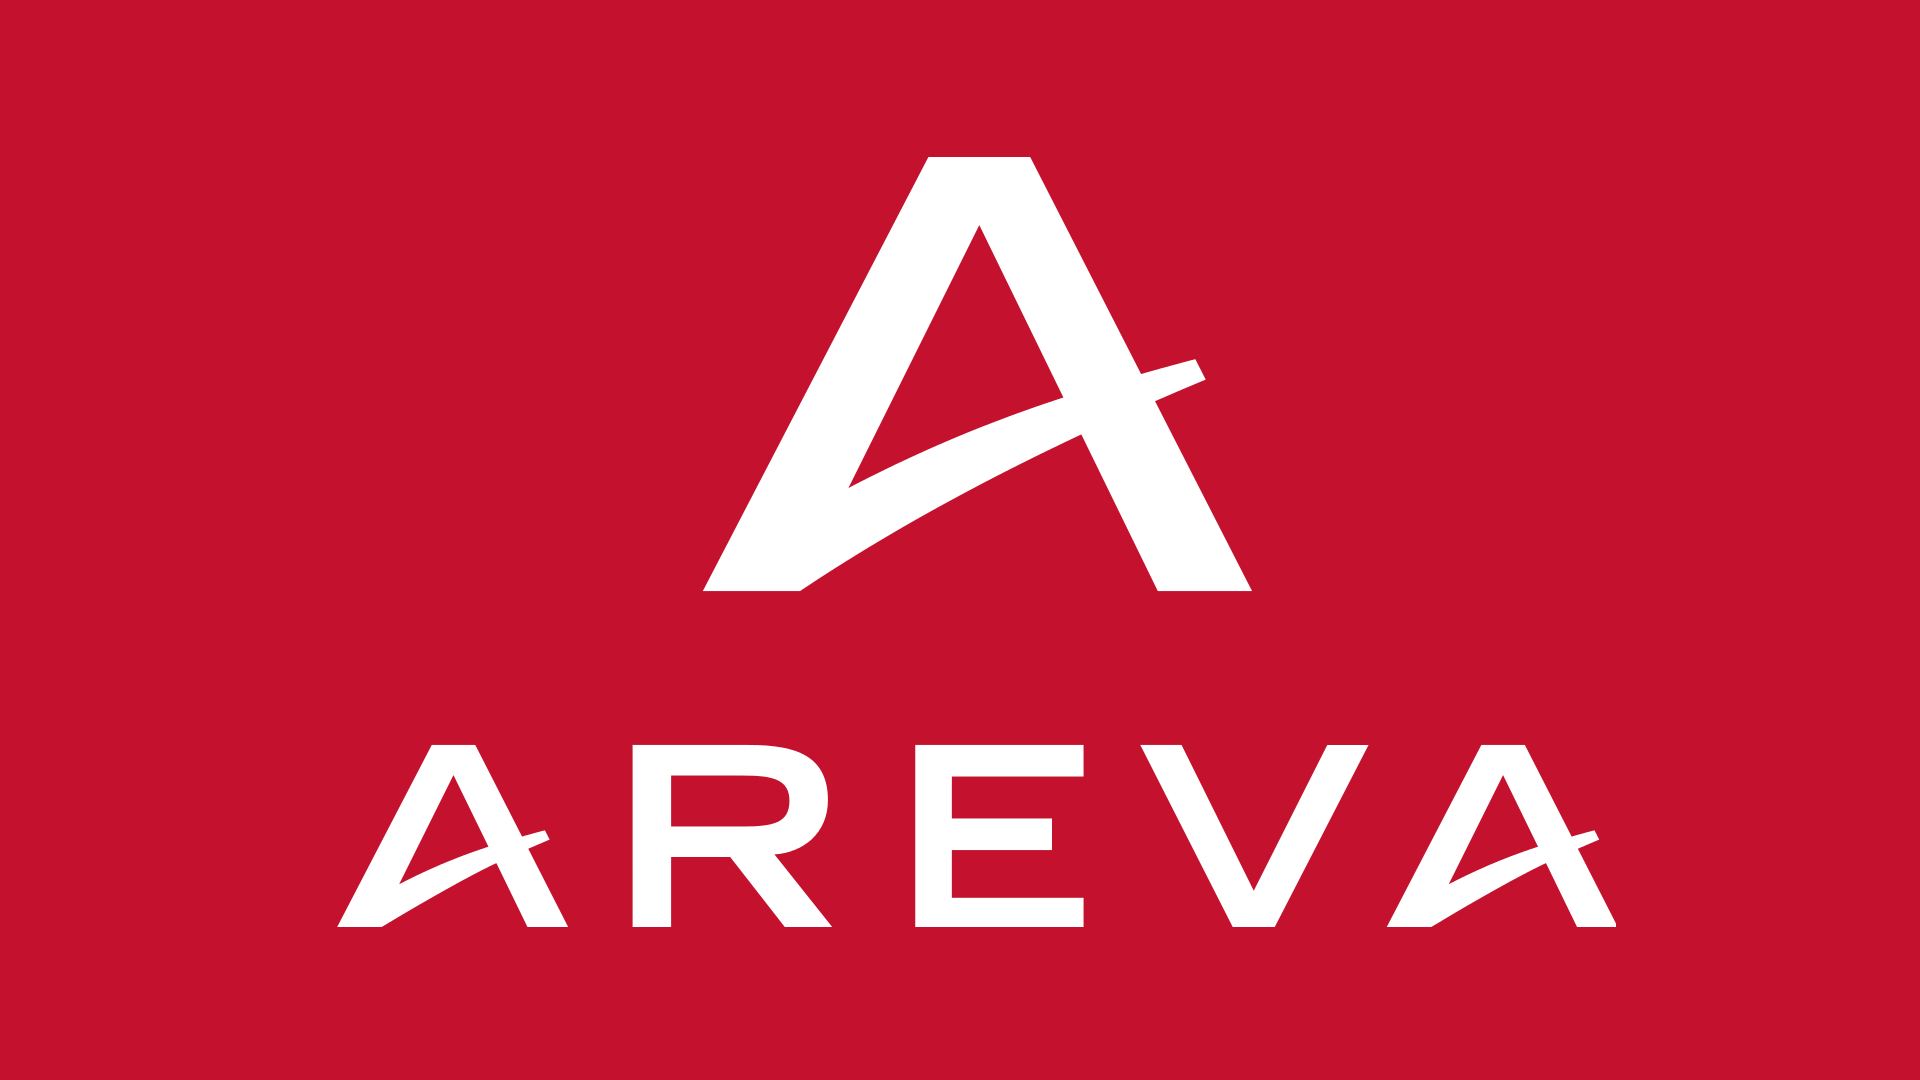 Areva Vector PNG Transparent Areva Vector.PNG Images. | PlusPNG